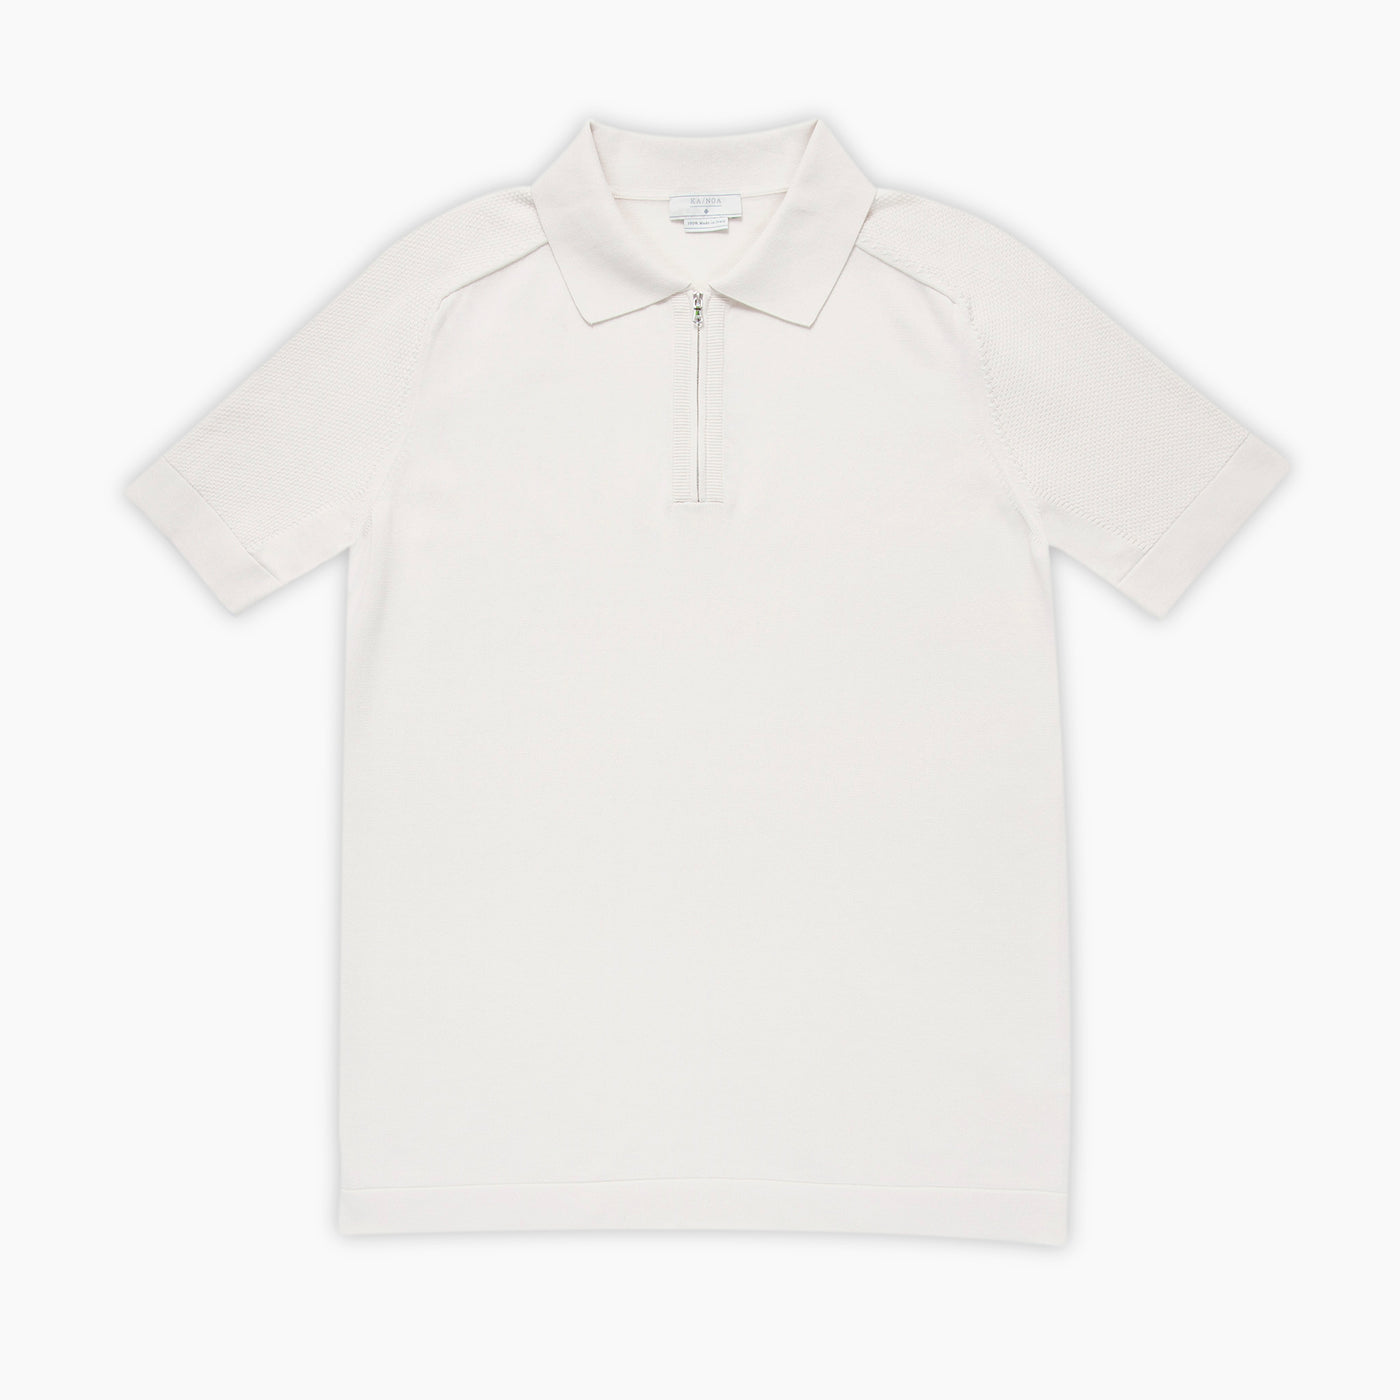 Lauter short-sleeved knitted zipped polo in compact cotton